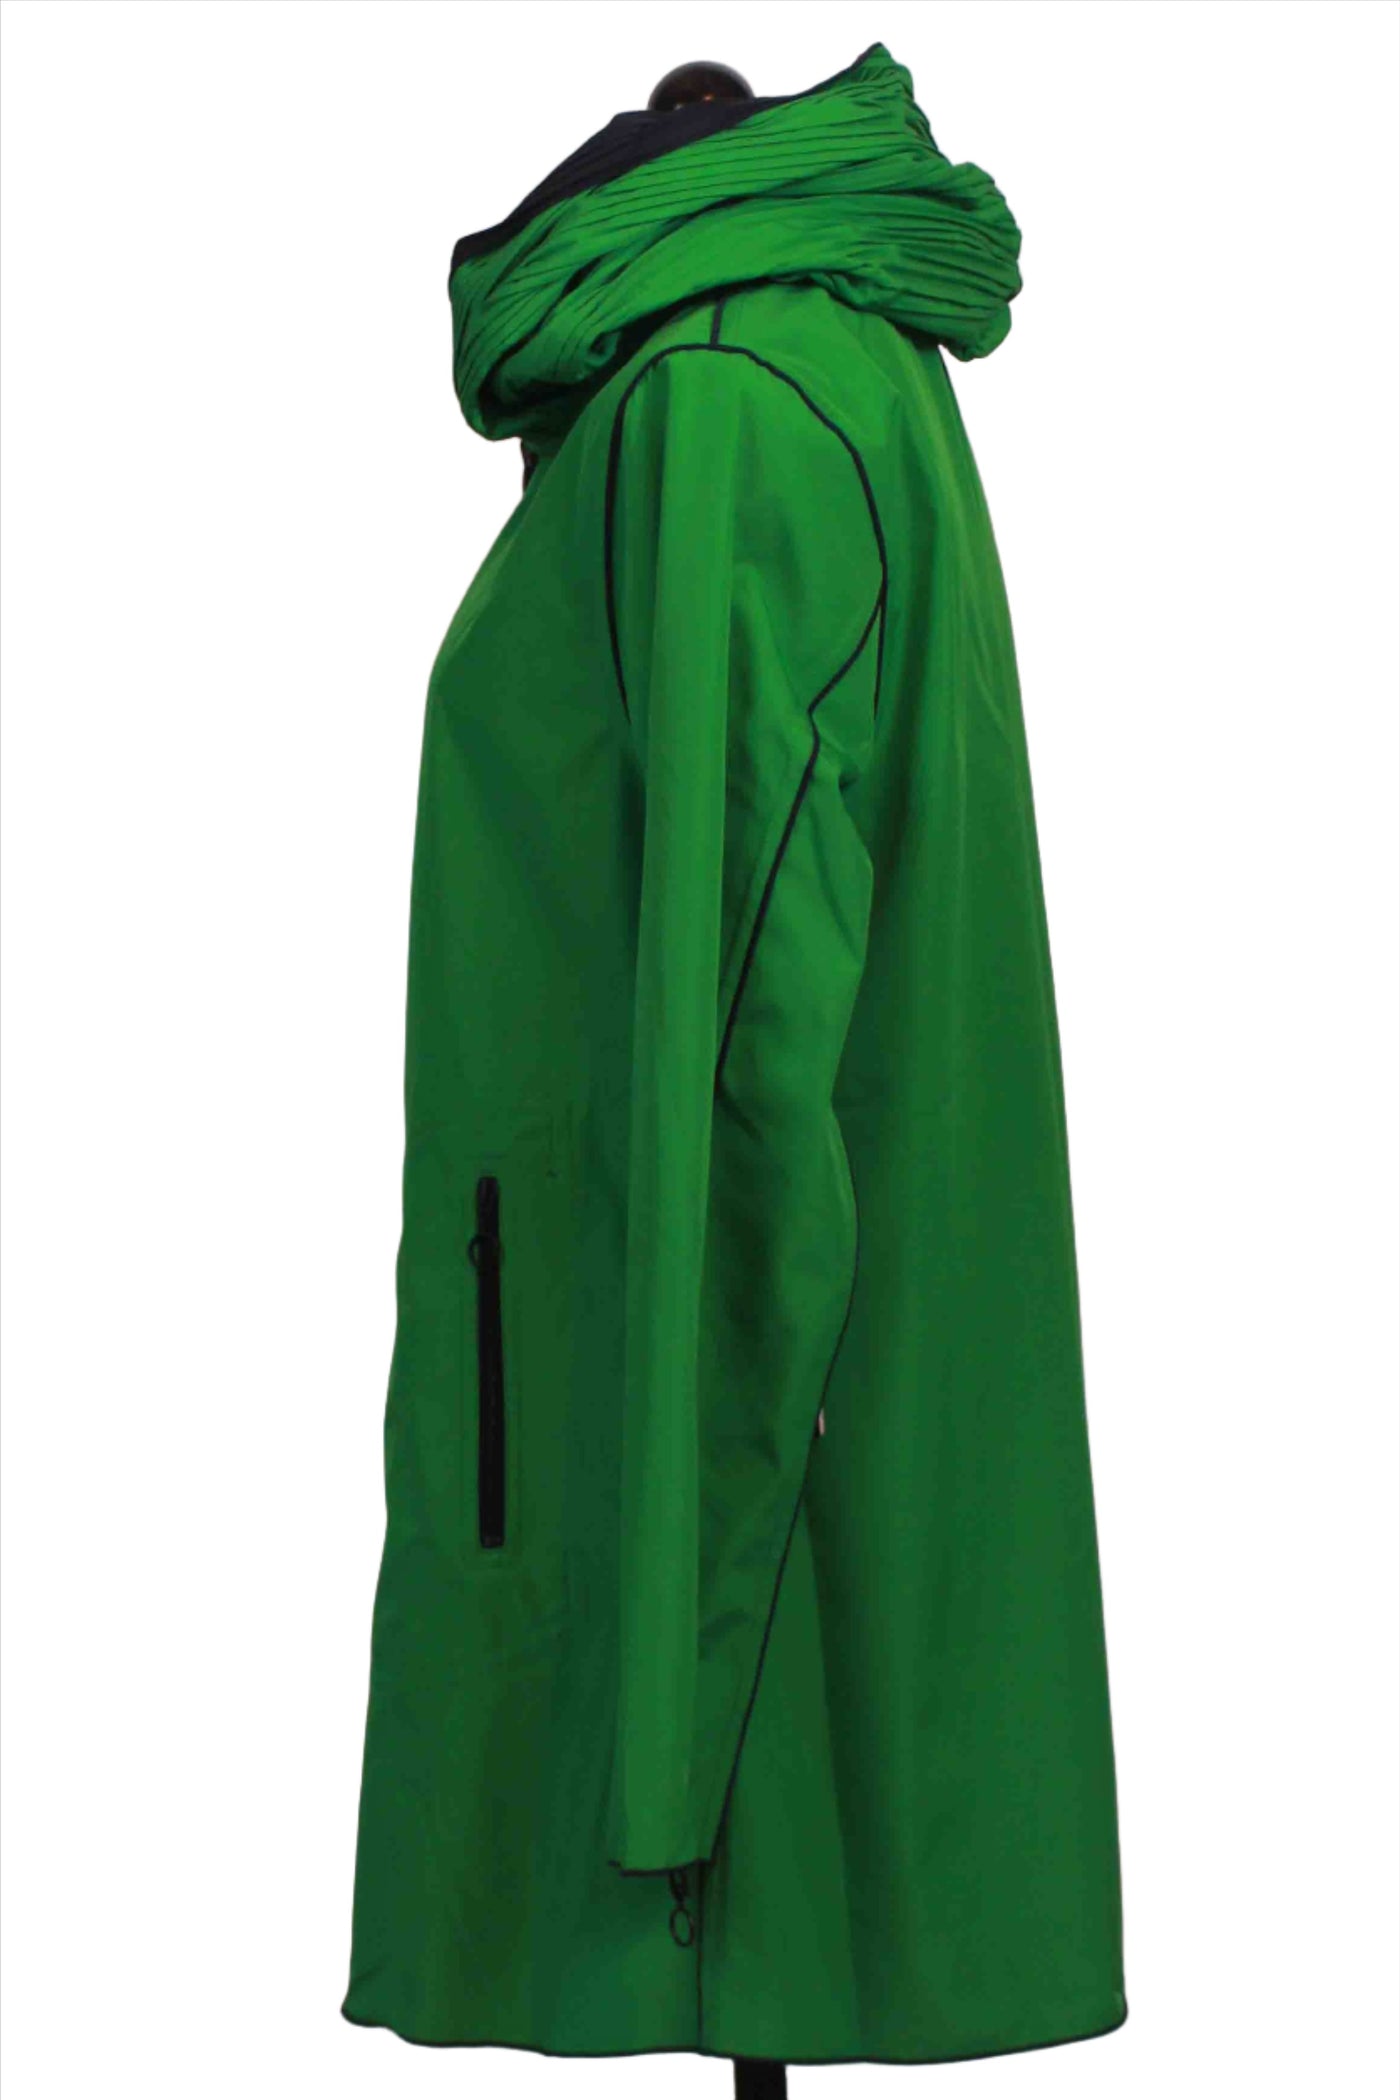 Side view of Green/Navy Reversible Pleated Hood/Collar Zip Front Parisian Jacket by UBU